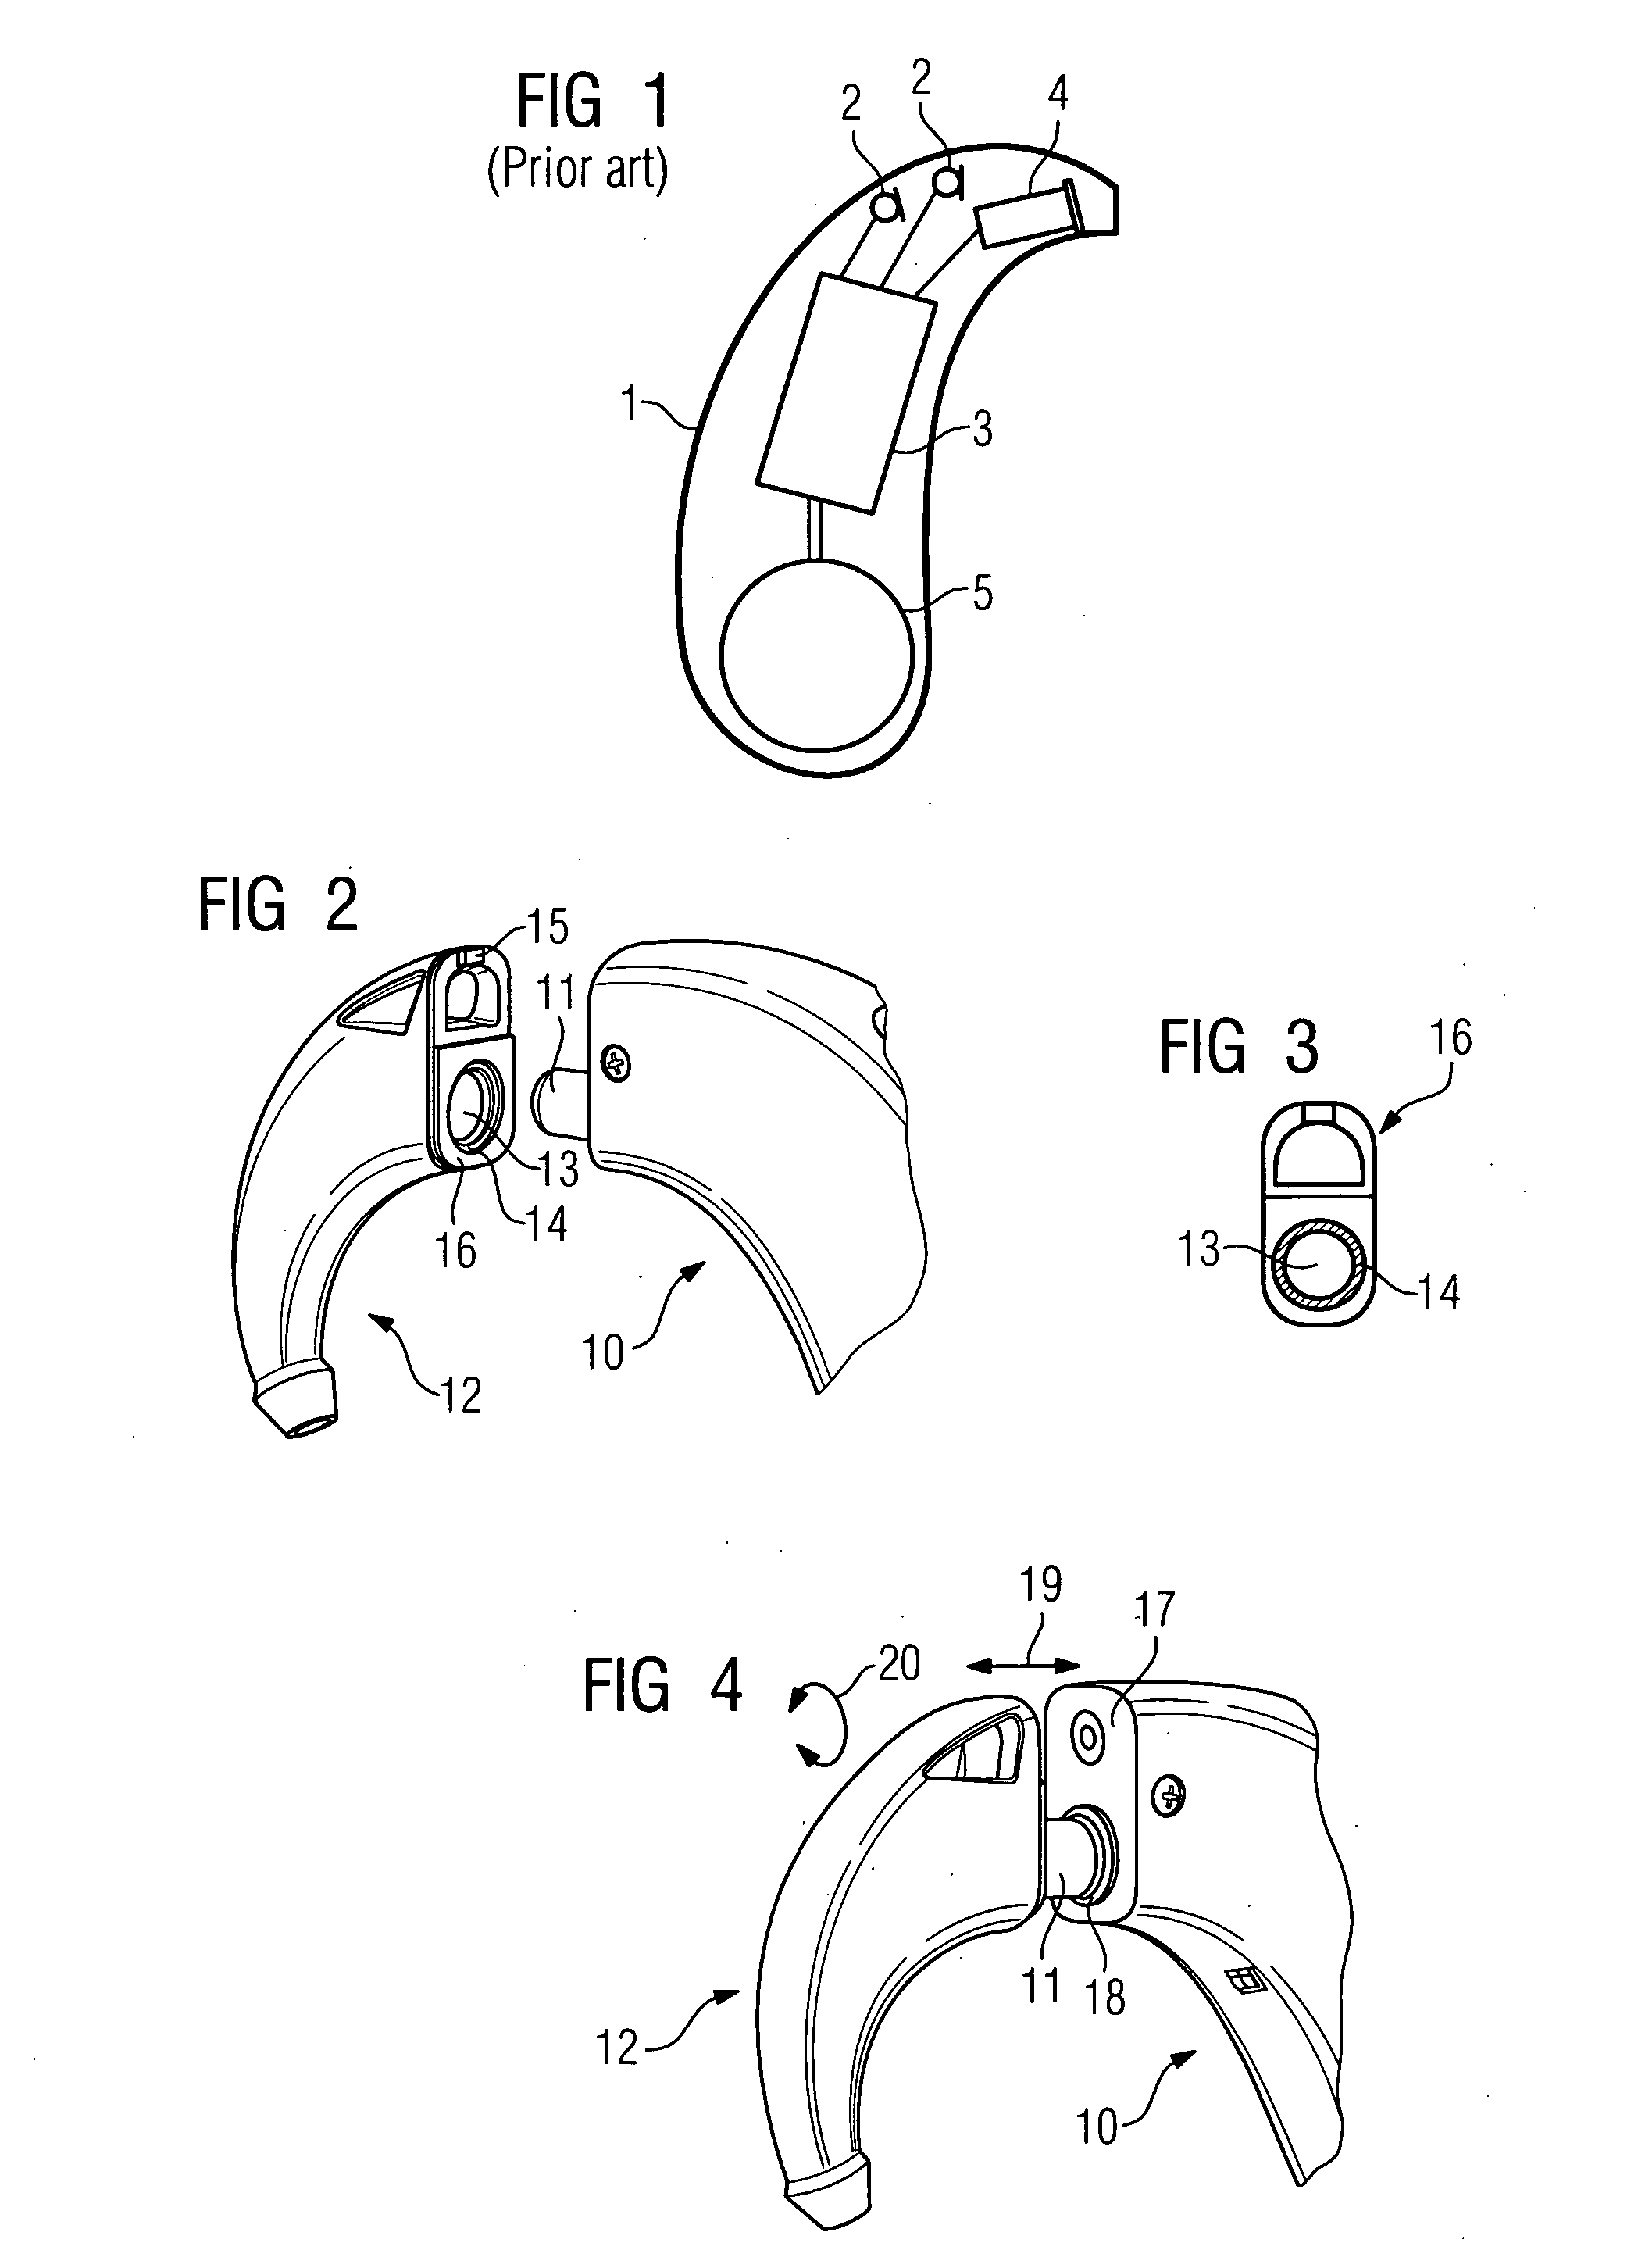 Behind-the-ear hearing device with a magnetically-attached ear hook